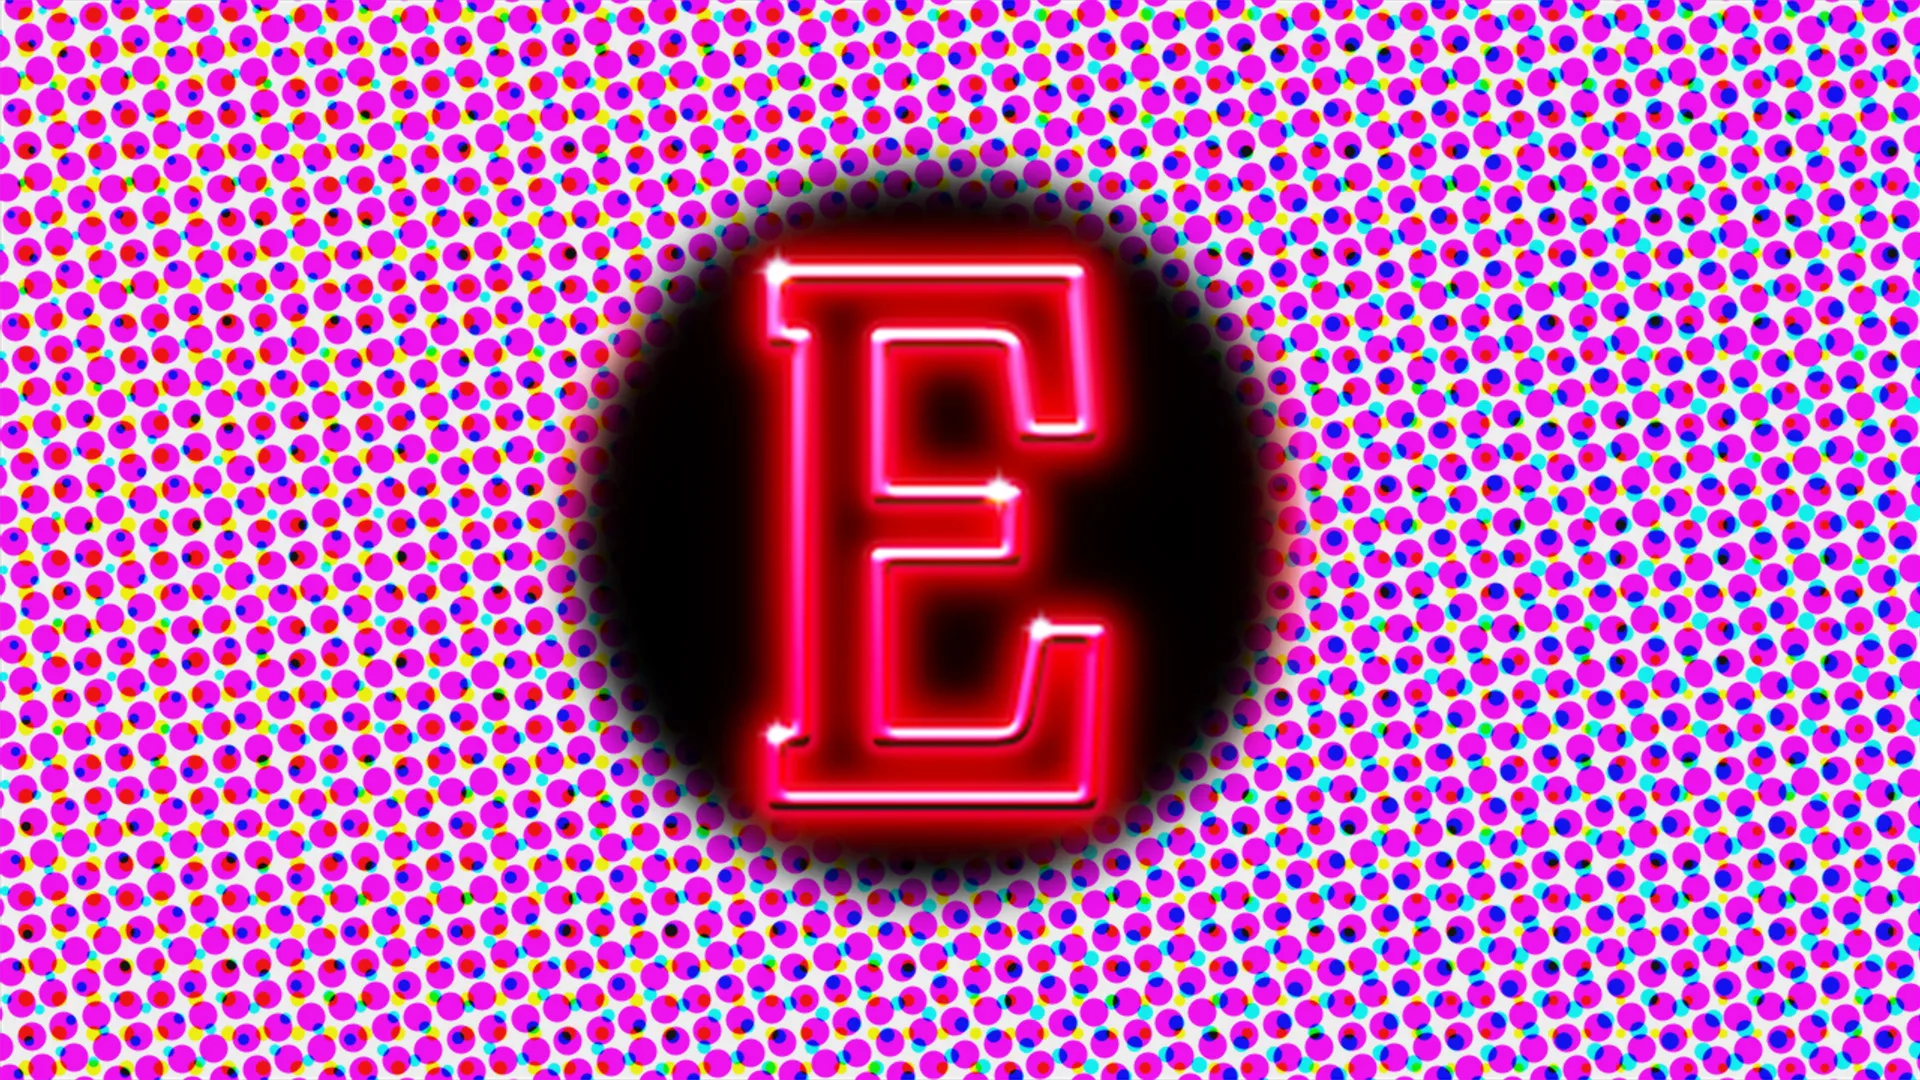 The letter 'E' lit in red neon